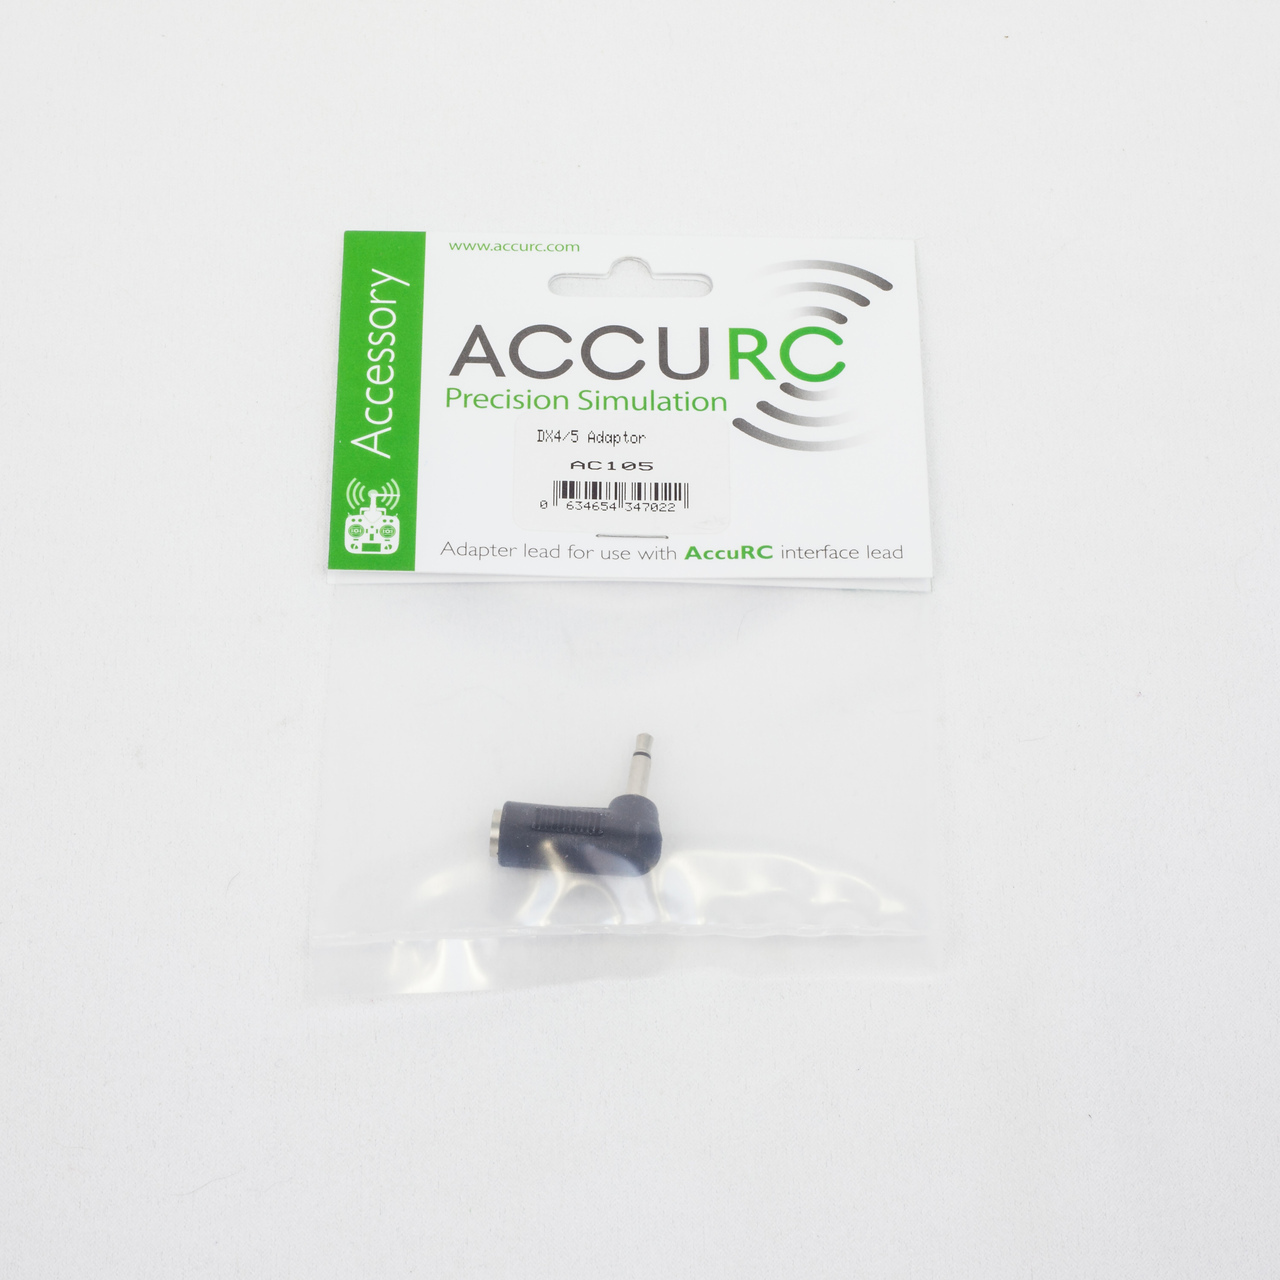 AC105 - 3.5mm to Spectrum DX5 adapter – only use for Spectrum DX5 Transmitters